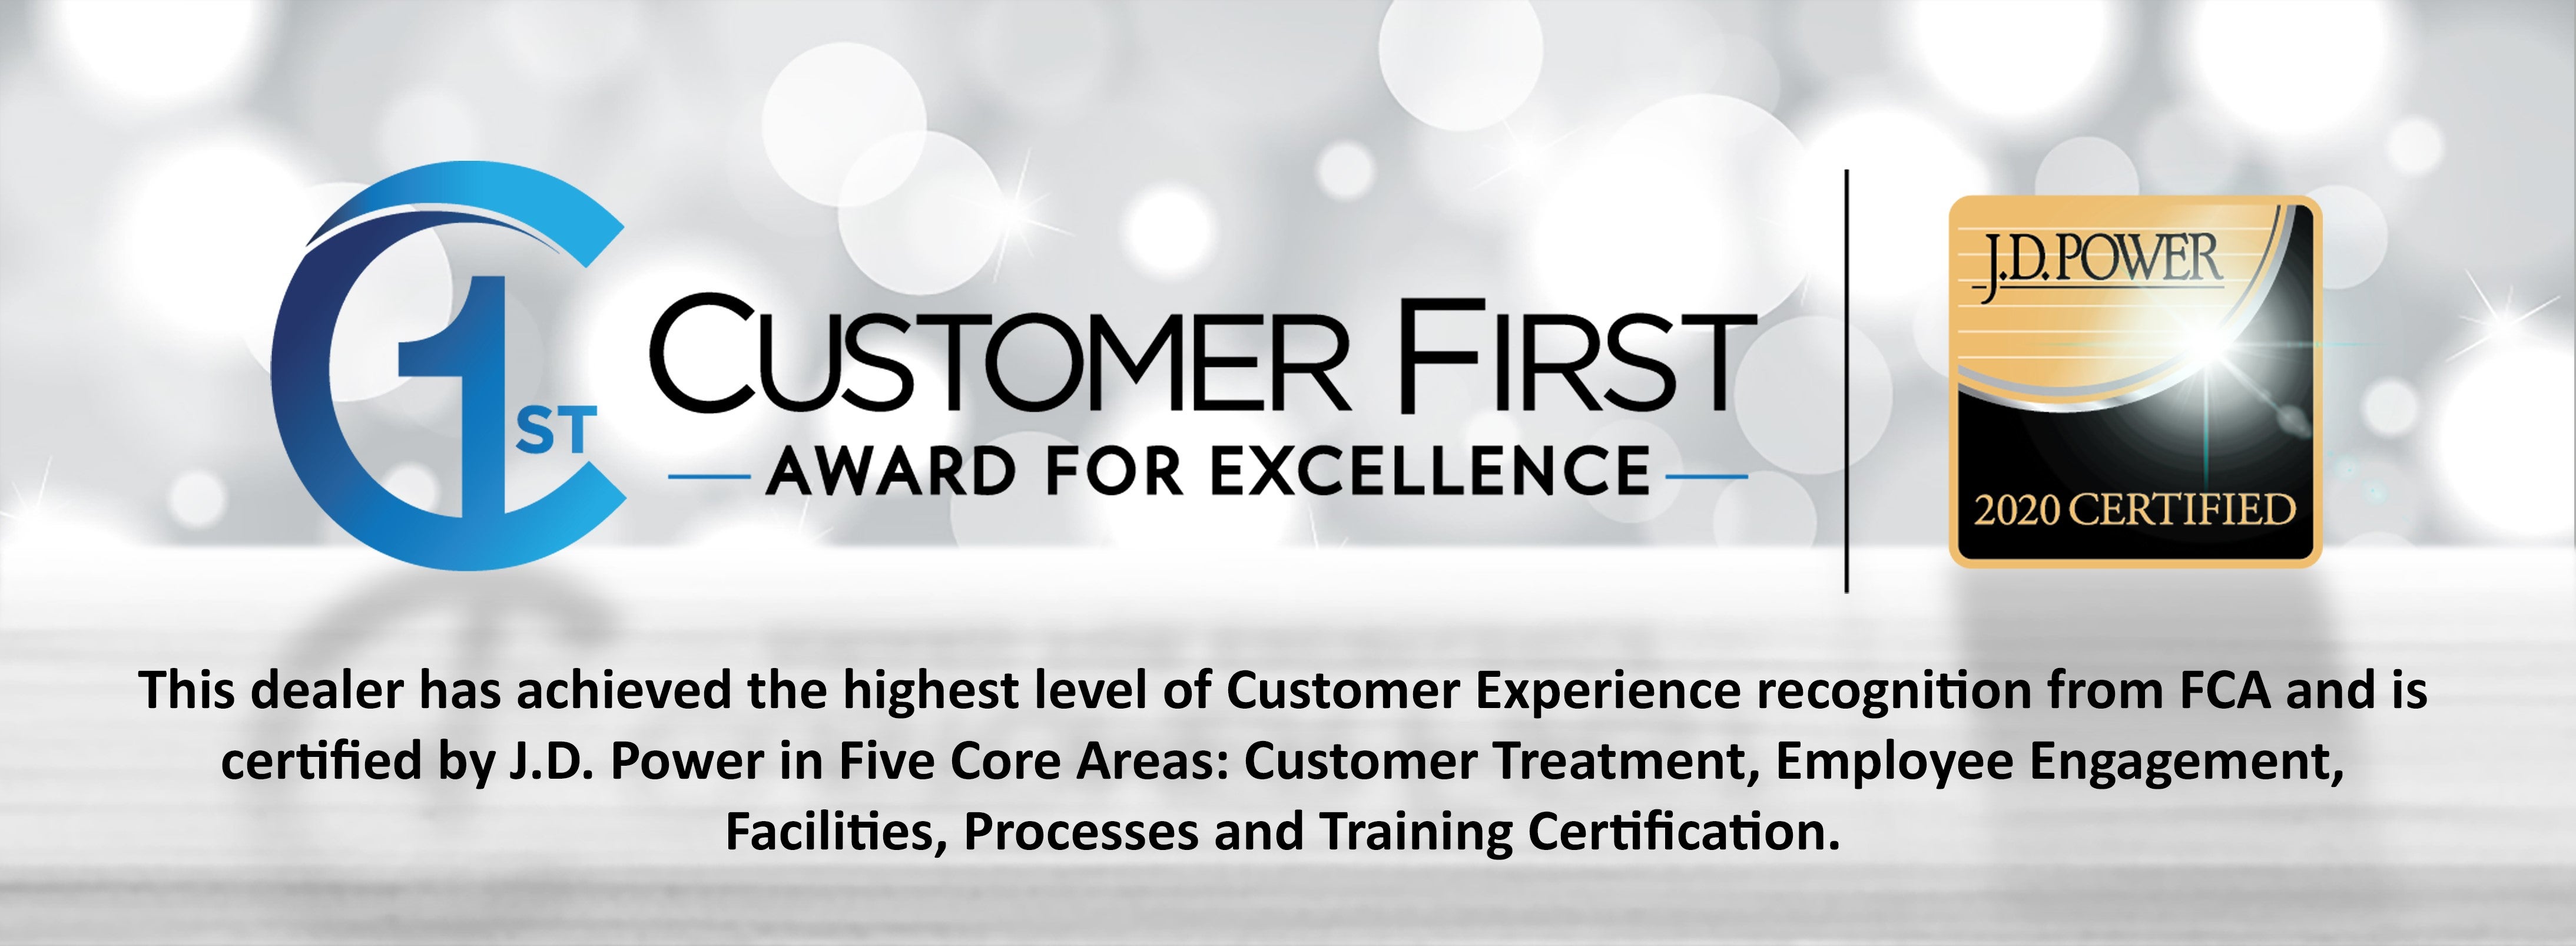 Customer First Award for Excellence for 2019 at Vance Chrysler Dodge Jeep Ram Miami in Miami, OK